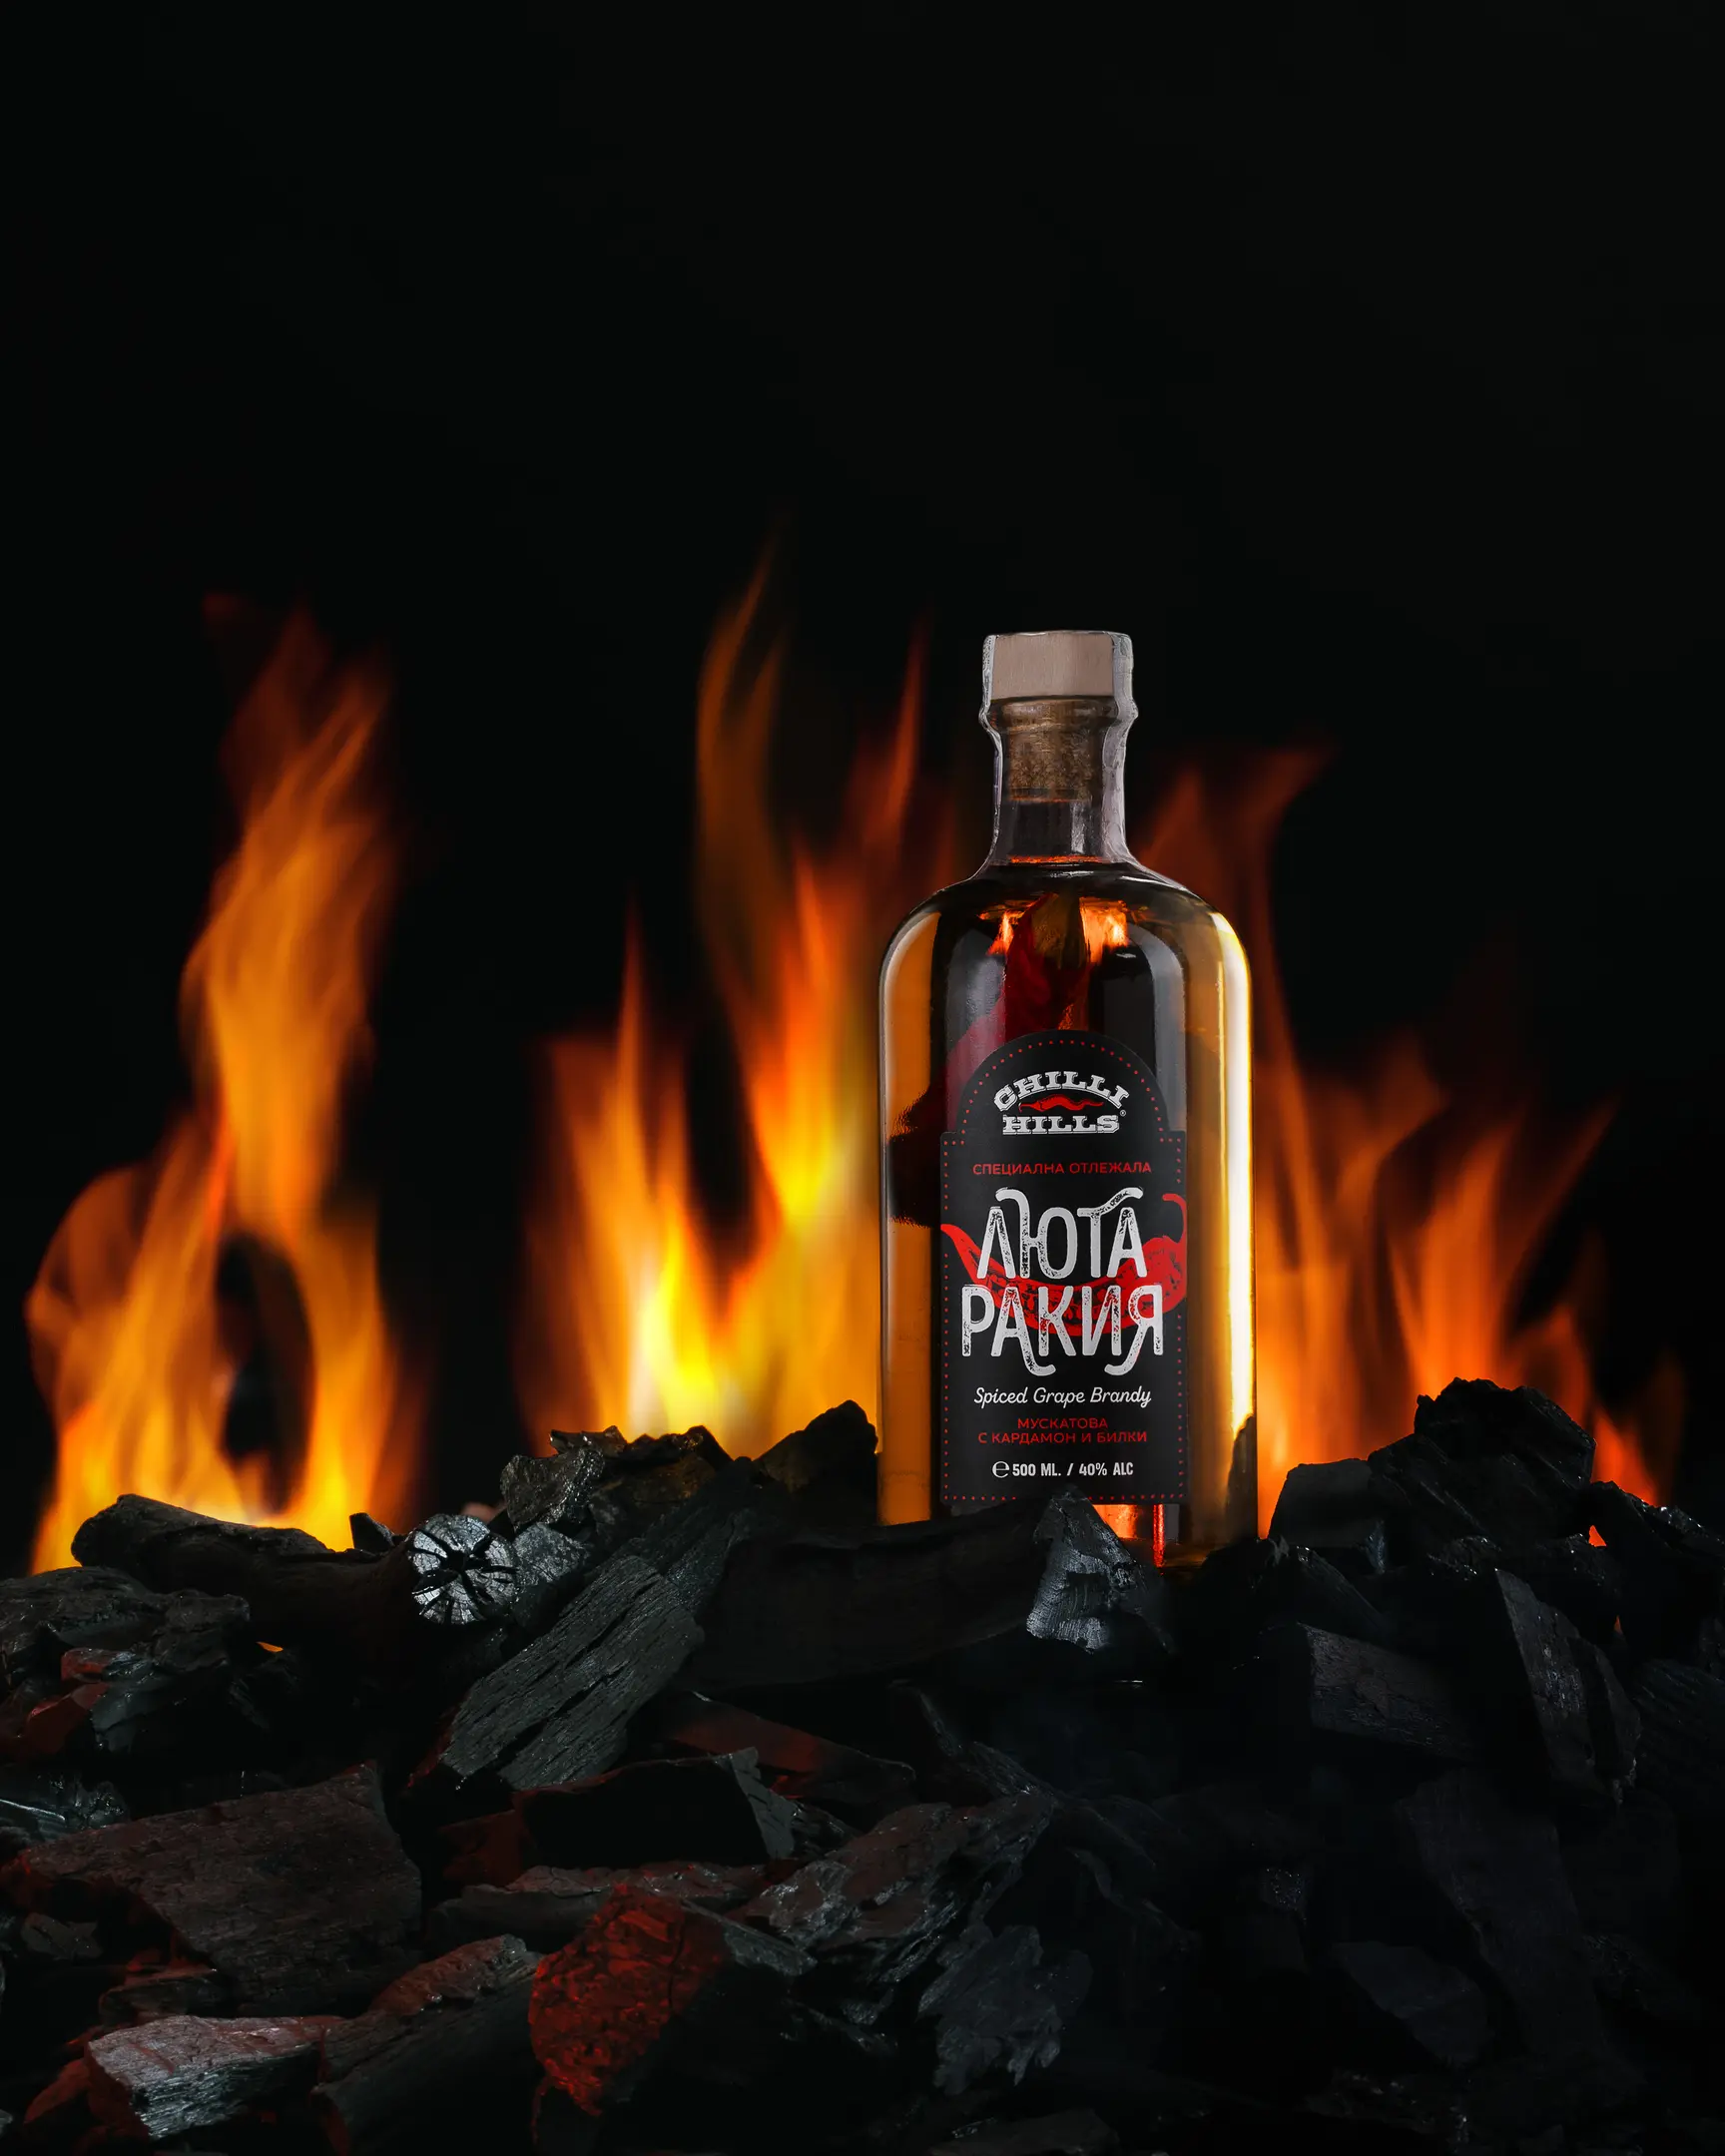 Final Photo. A bottle of Chilli Hills Rakia sits on smoldering coals. Smoke is visible near the bottle on the right in the foreground. Behind the bottle is a fire, which also shines through a transparent bottle. Pepper is visible inside the bottle.